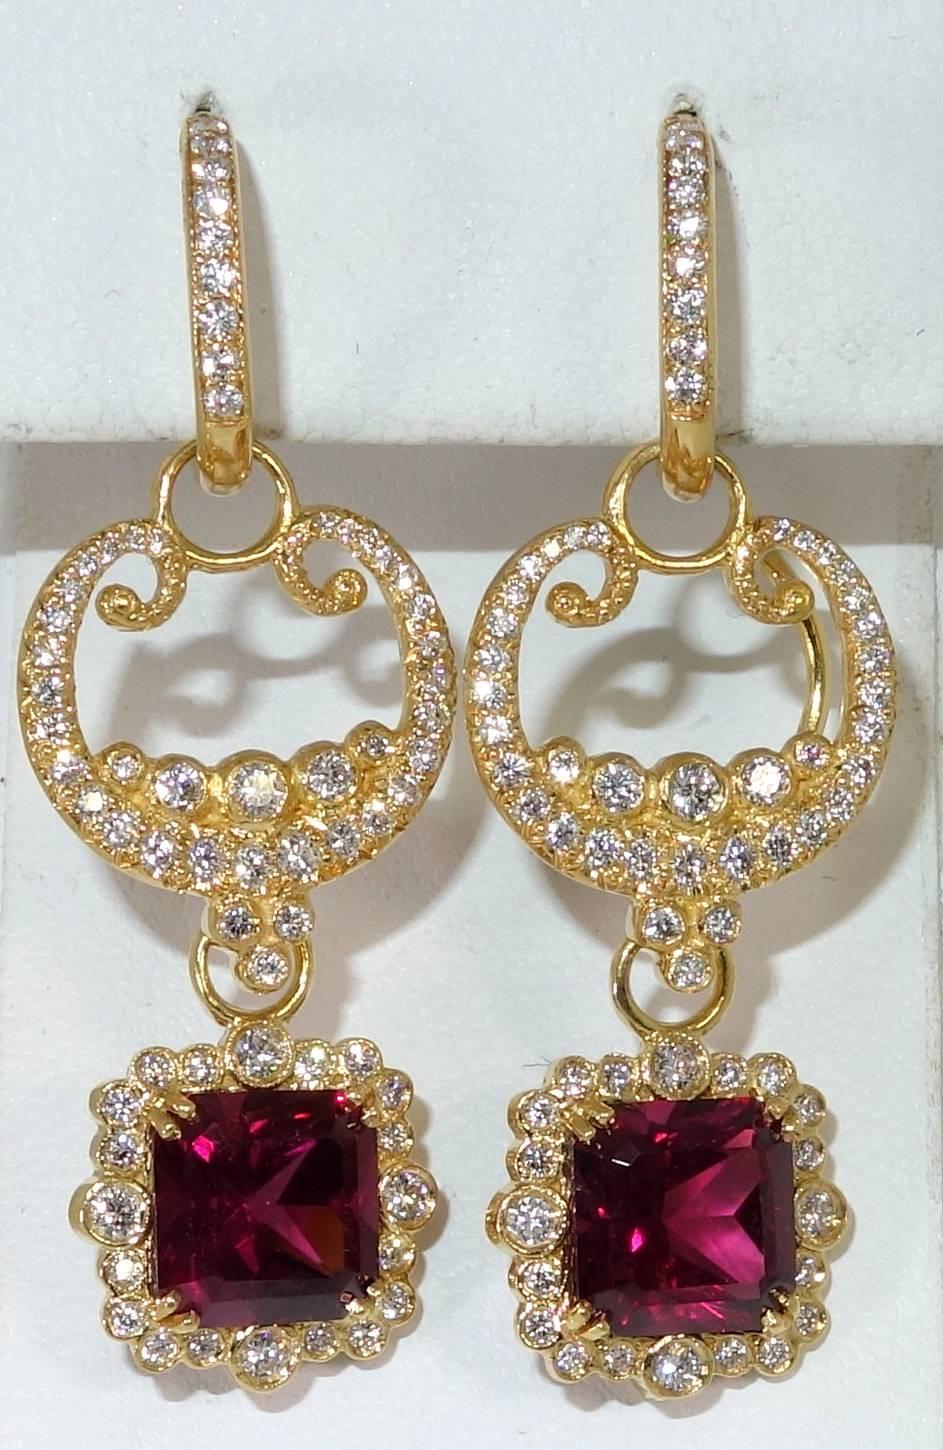 Diamond and 18K gold earrings which can be worn five different ways.  These earrings are well made, bright and unusual.  The Rhodolite garnets are clean and bright and well matched.  The color is superb.  They weigh totaling approximately 6 cts. 